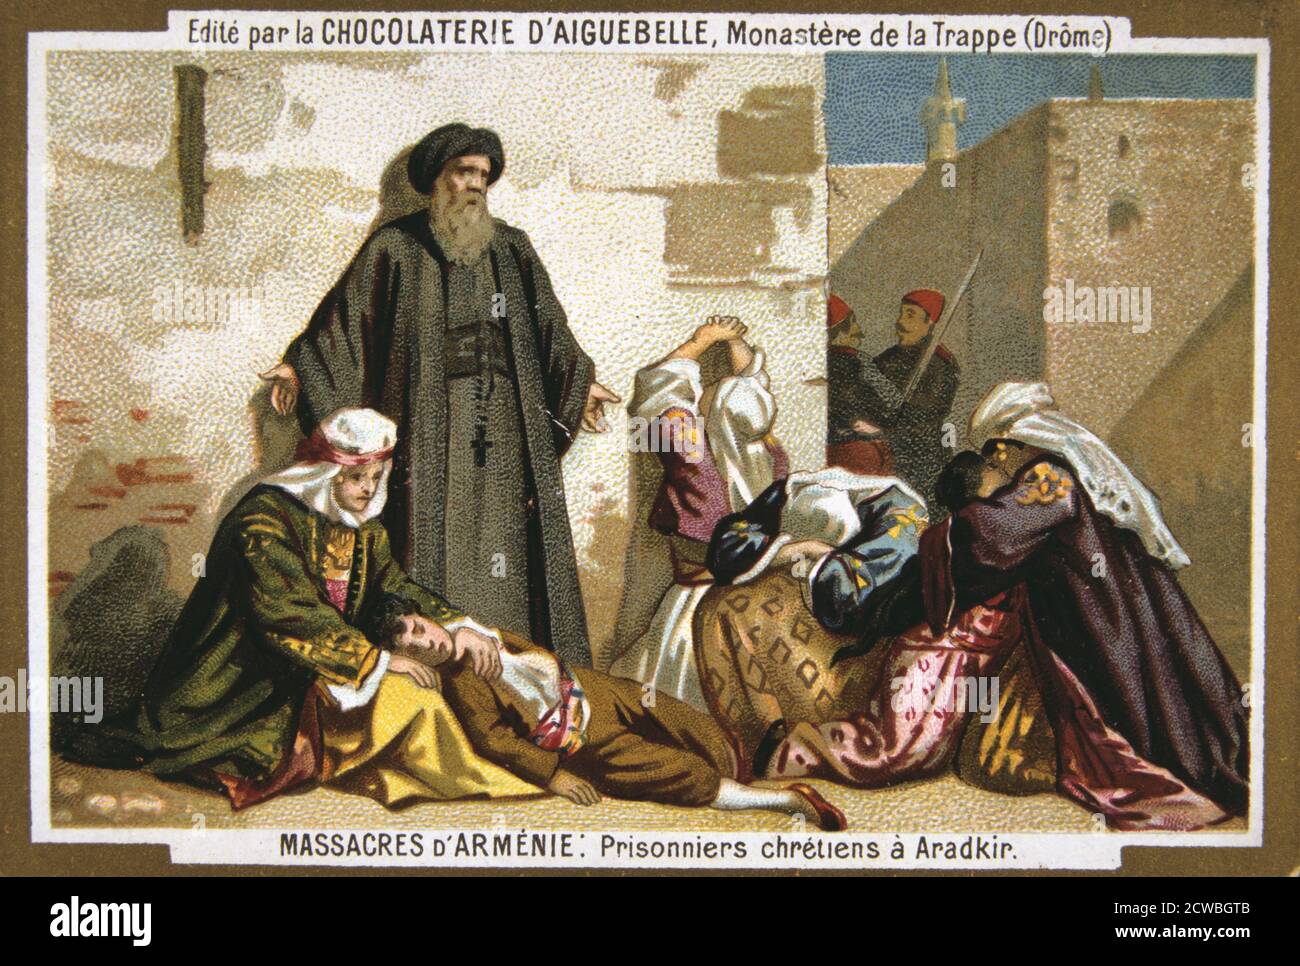 Christian prisoners at Aradkir, 1895. This is possibly a mis-spelling of Arabkir, or Arapkir, in Turkey where the Armenian population suffered greatly in the massacres of 1895. Eurocentric portrayal of historical events - scene from the Massacres of Armenia card series produced by the chocolate factory at the Monastery of Aiguebelle. Stock Photo